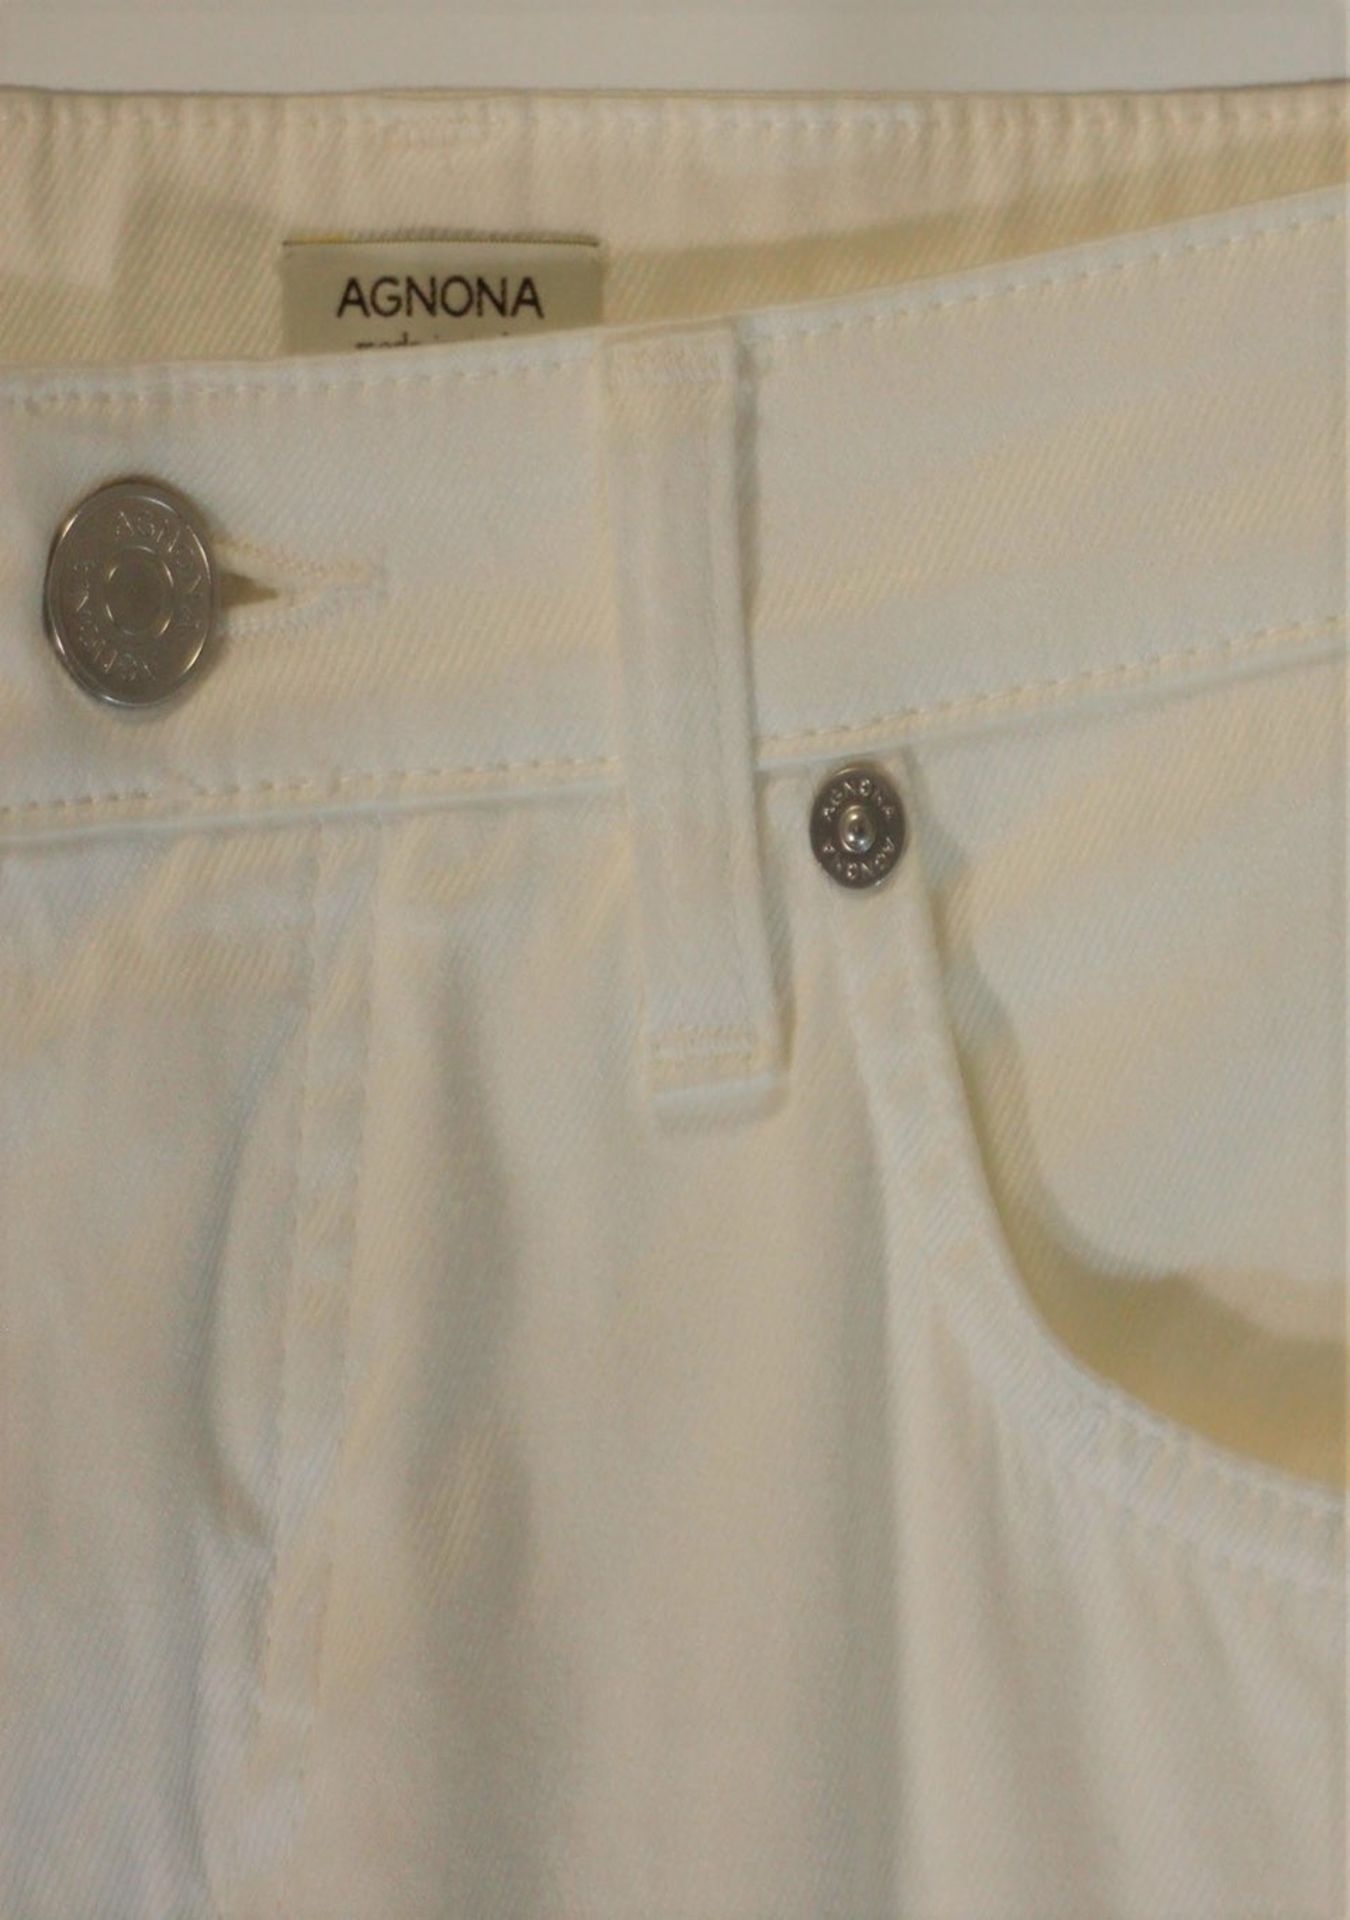 1 x Agnona Cream Jeans - Size: 14 - Material: 98% Cotton, 2% Elastane. Lining 100% Cotton - From a - Image 5 of 6